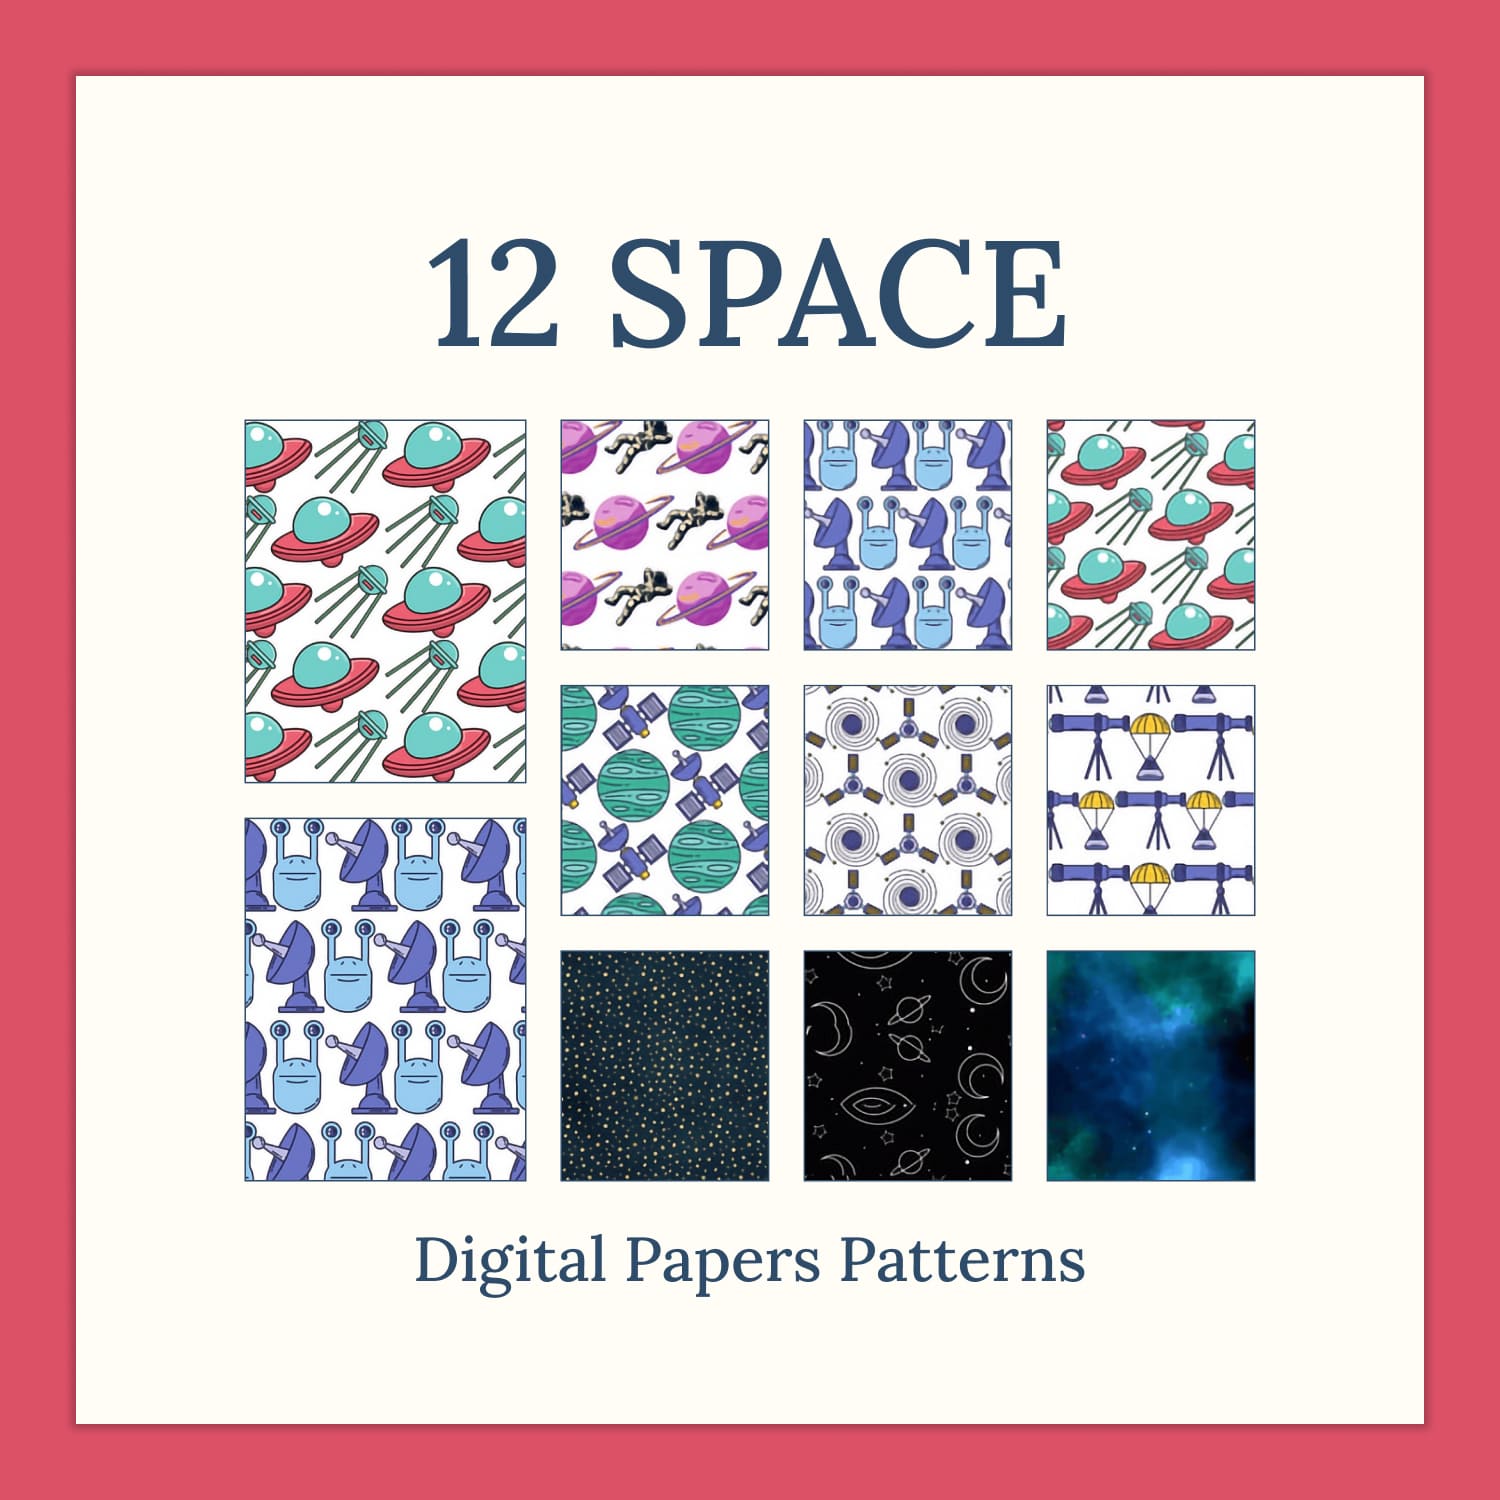 12 space papers patterns on the white background.